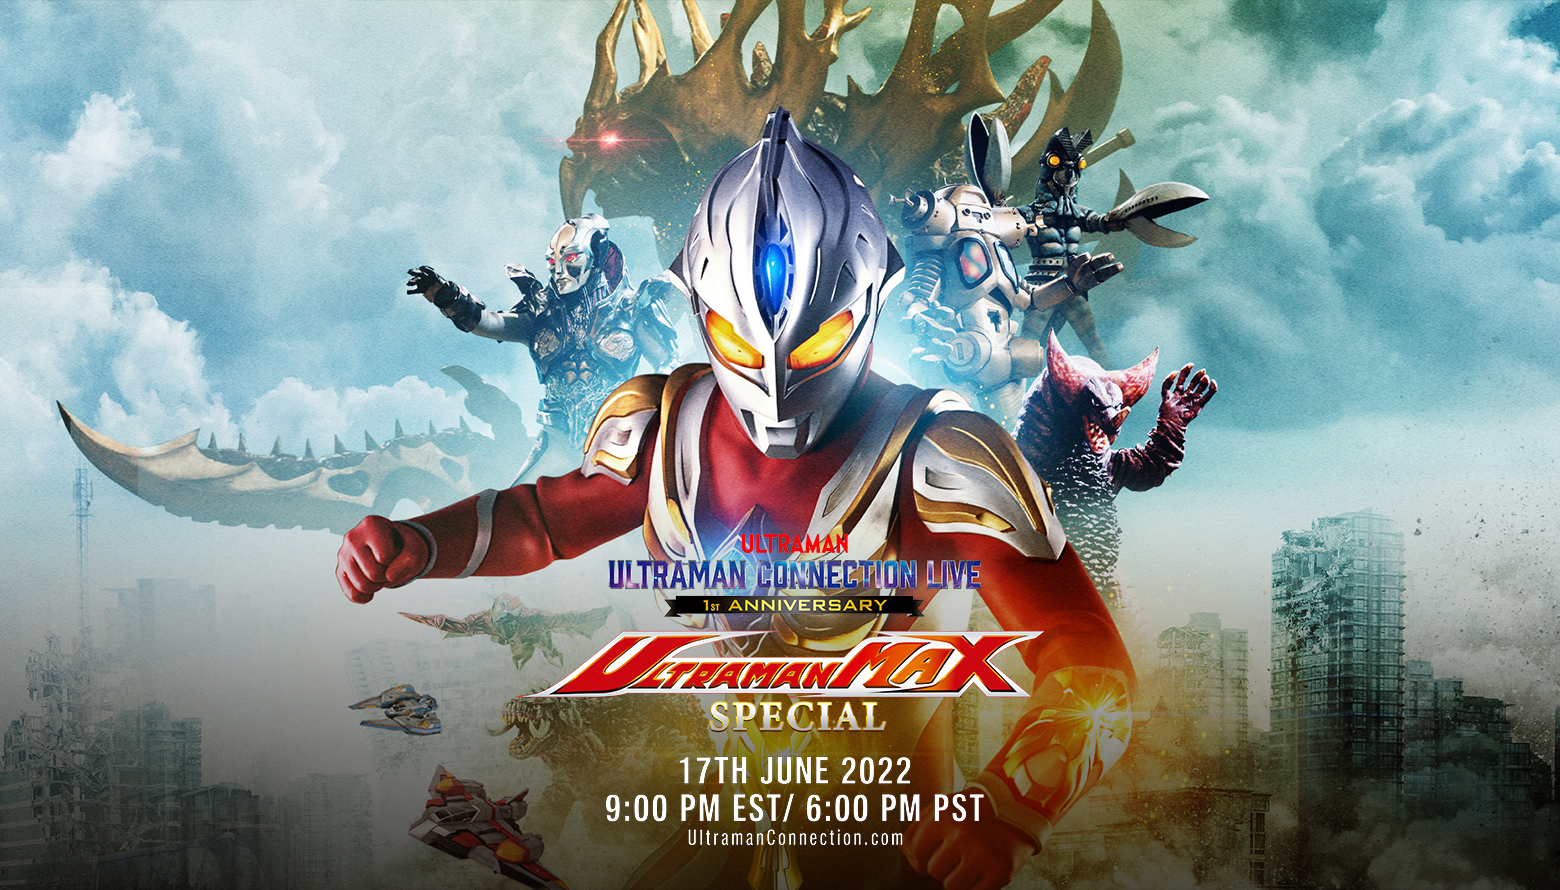 ULTRAMAN CONNECTION LIVE 1ST ANNIVERSARY: ULTRAMAN MAX SPECIAL ANNOUNCED!